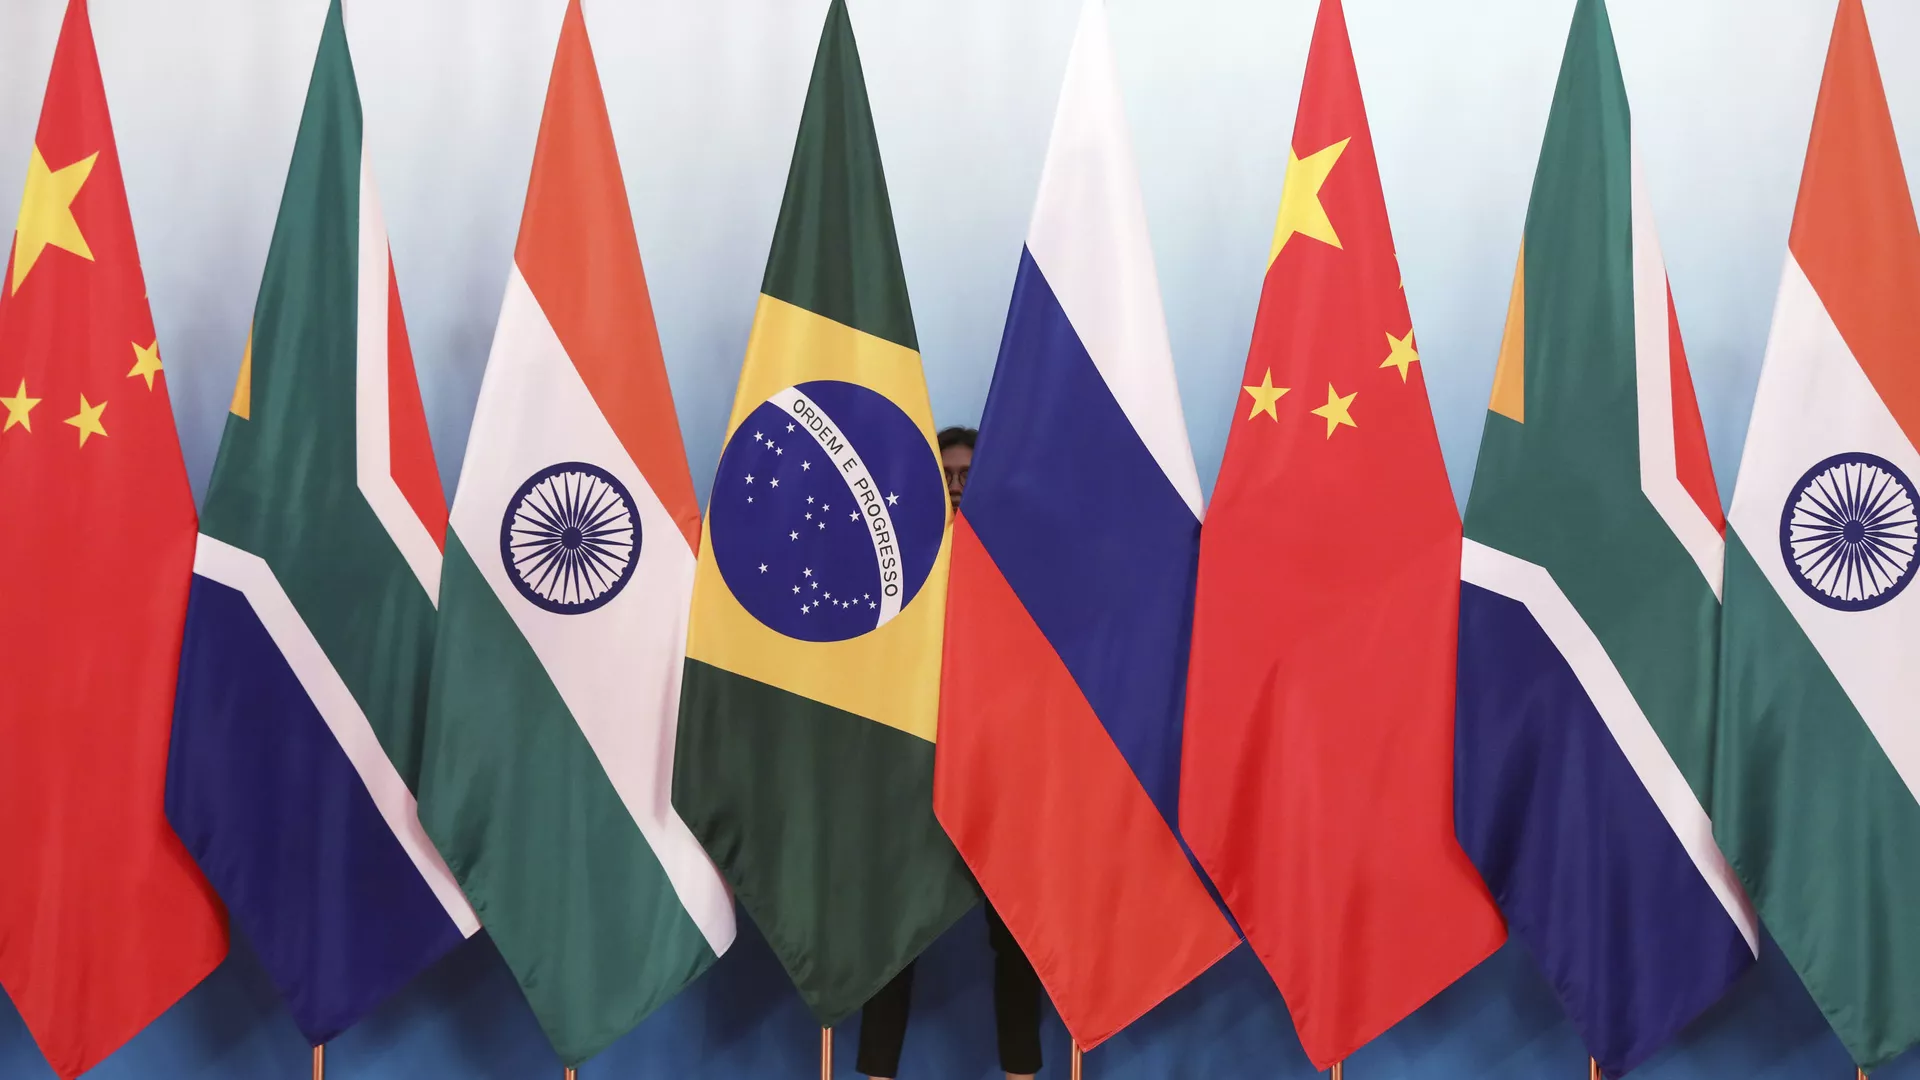 Staff worker stands behinds national flags of Brazil, Russia, China, South Africa and India to tidy the flags ahead of a group photo during the BRICS Summit at the Xiamen International Conference and Exhibition Center in Xiamen, southeastern China's Fujian Province, Monday, Sept. 4, 2017. - Sputnik International, 1920, 29.05.2023